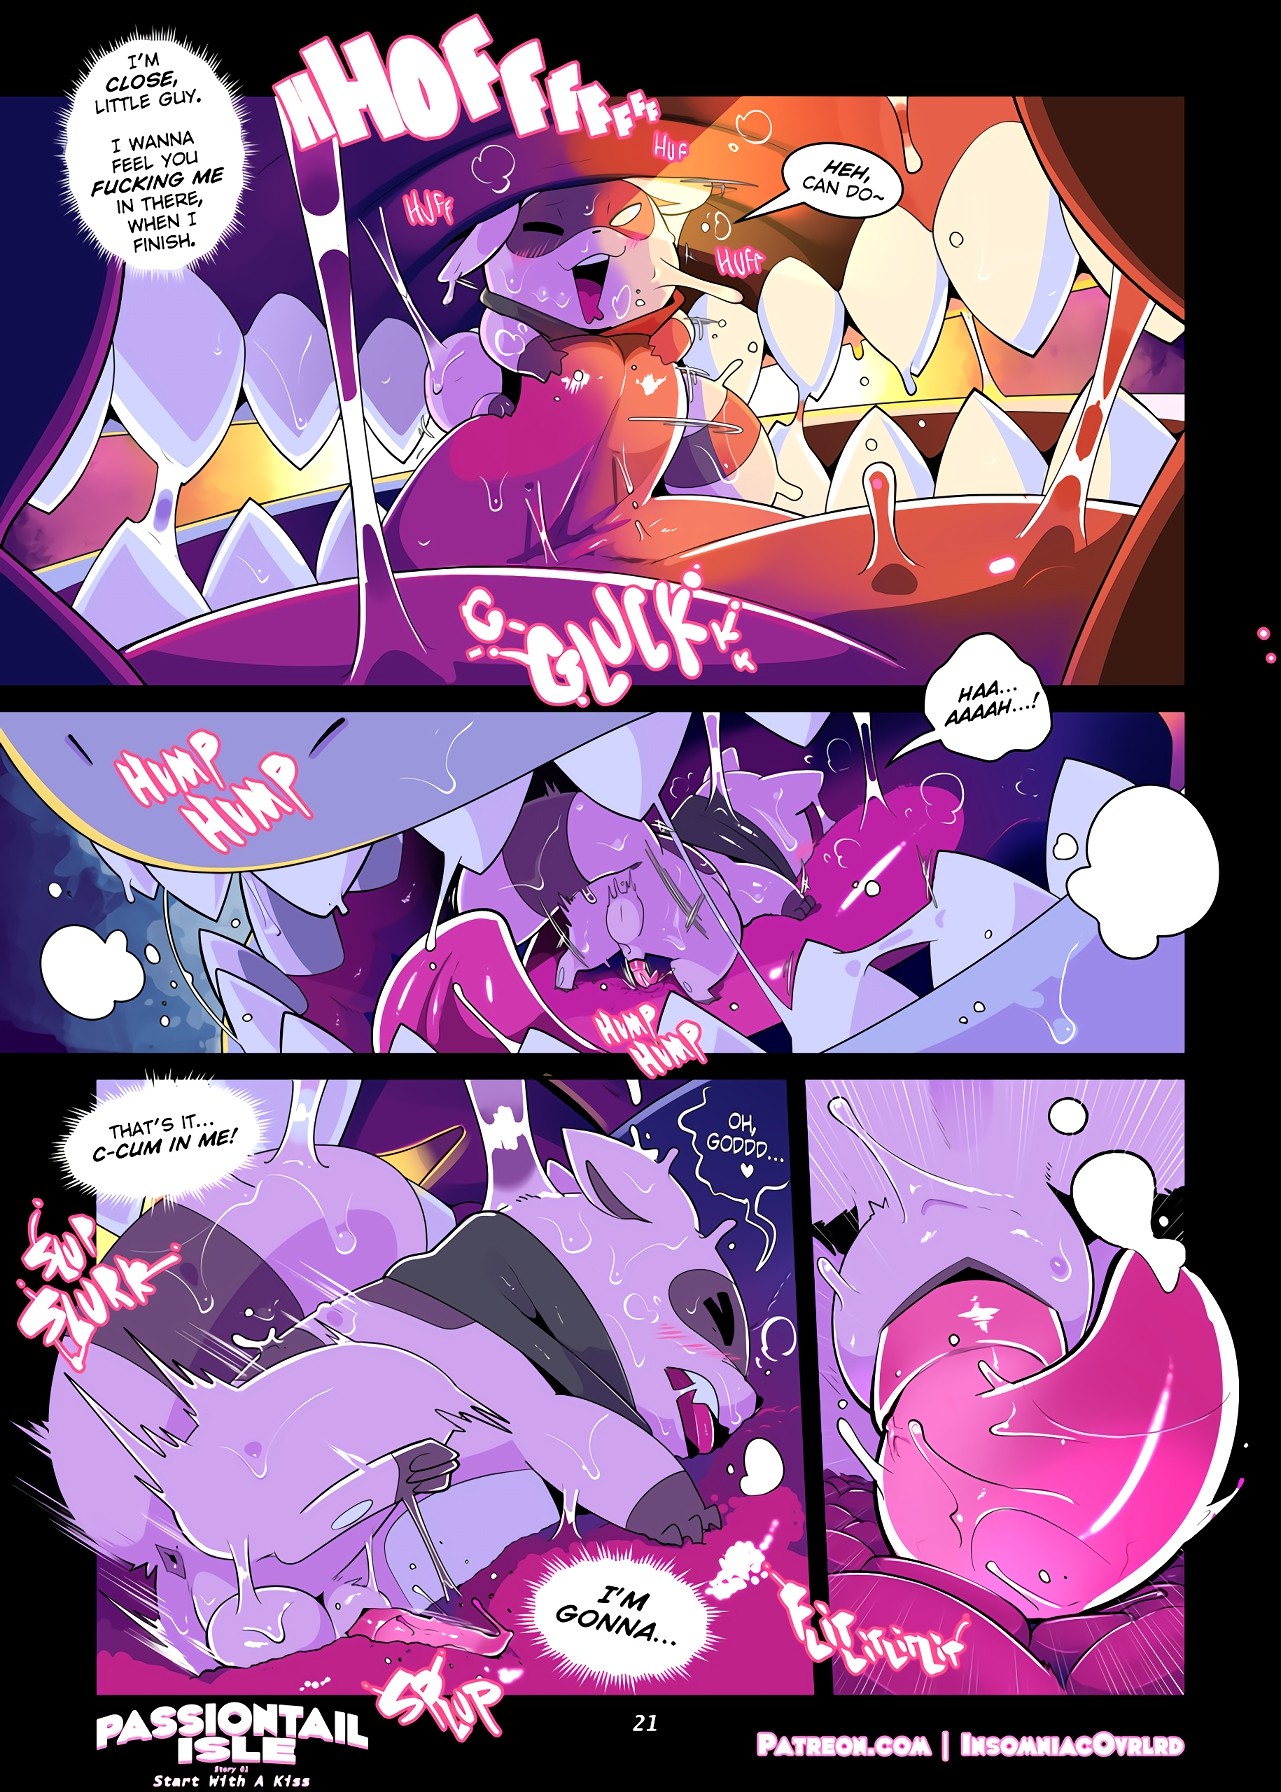 Passiontail Isle by Insomniacovrlrd porn comic picture 23